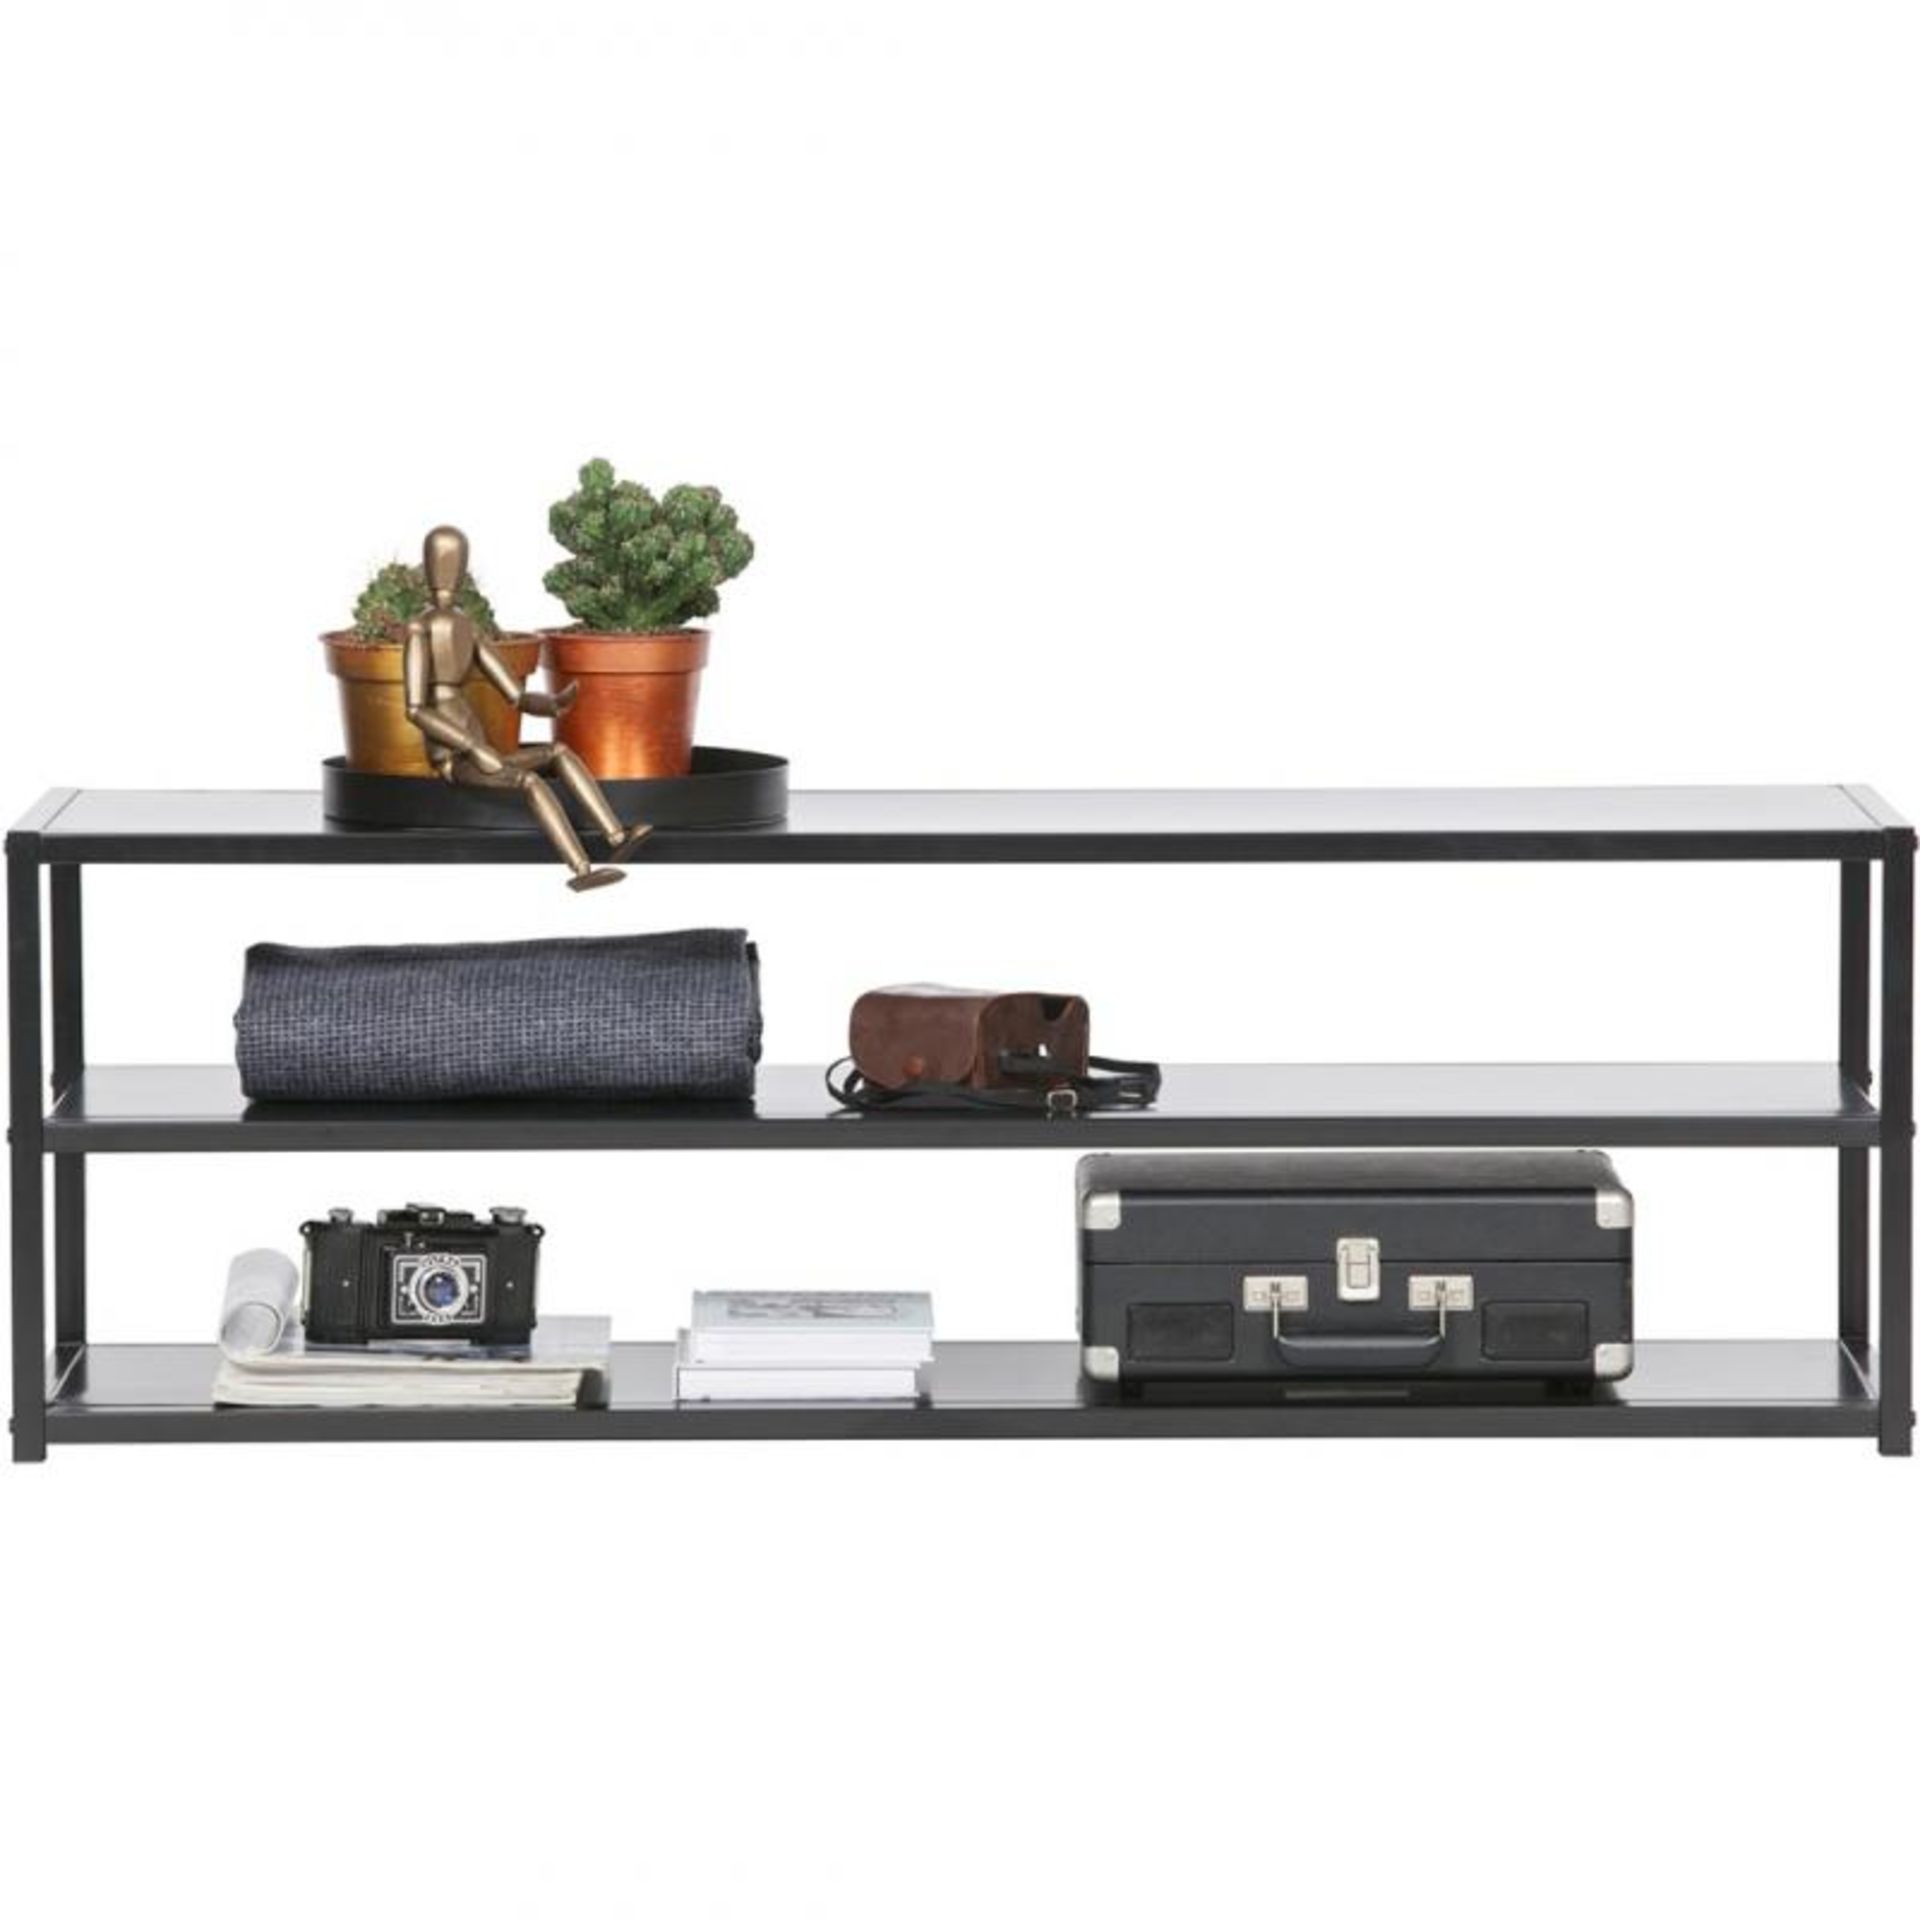 1 x 'Teun' Contemporary Sleek Black Metal TV Unit / Low Side Unit Produced By Woood Designs - Ref: 2